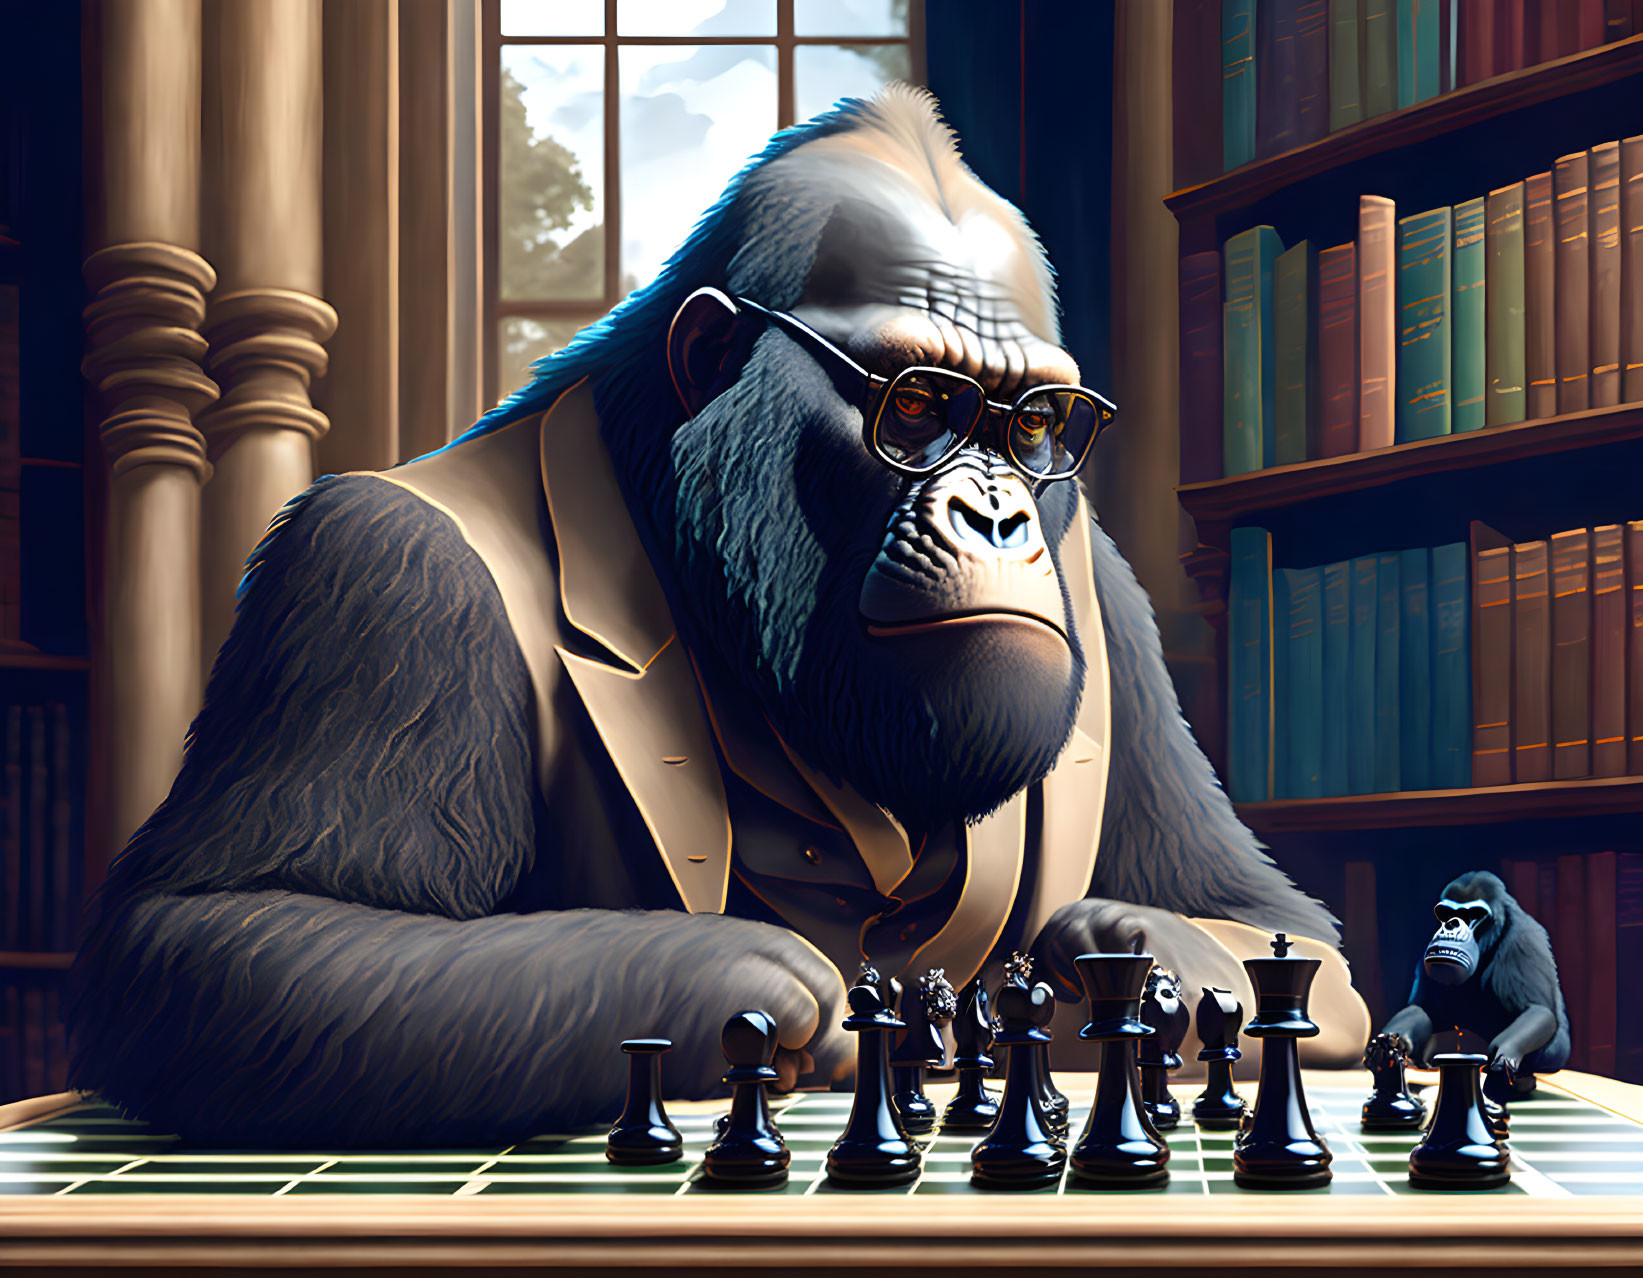 Gorilla in suit playing chess in library with books shelves